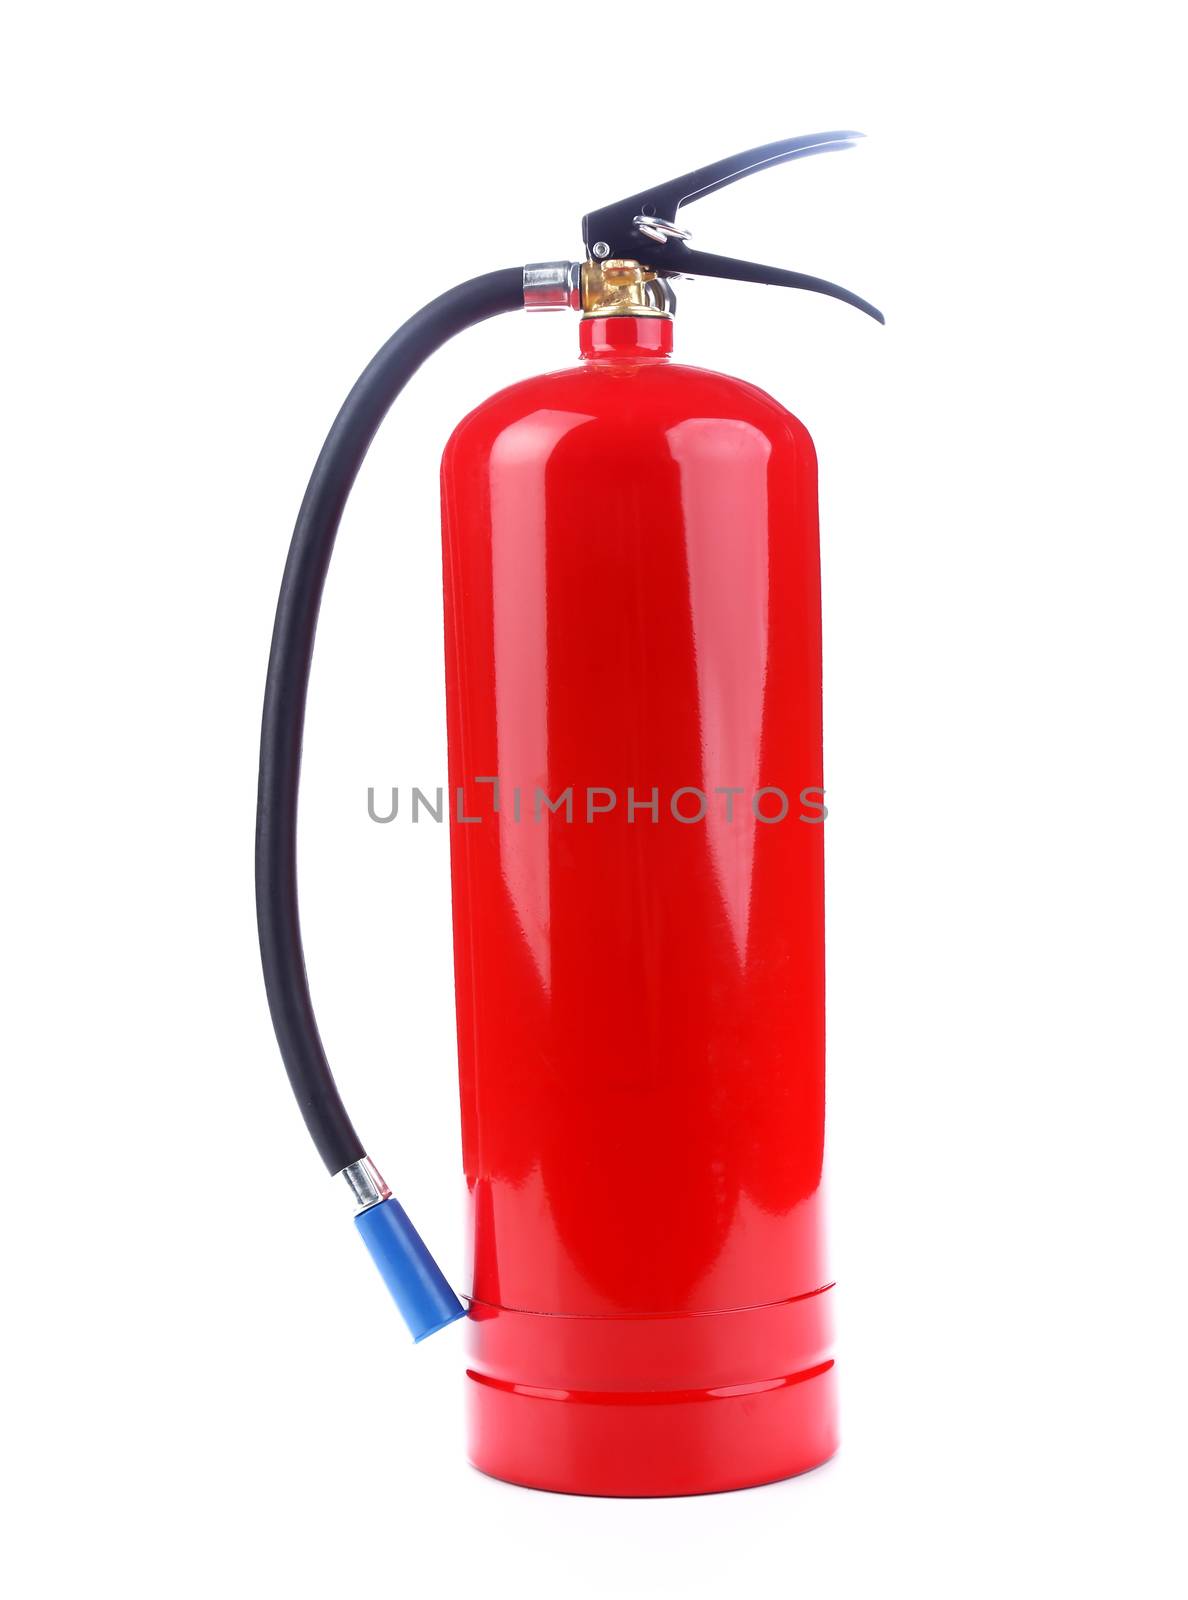 Chemical fire extinguisher isolated on white background, with clipping path